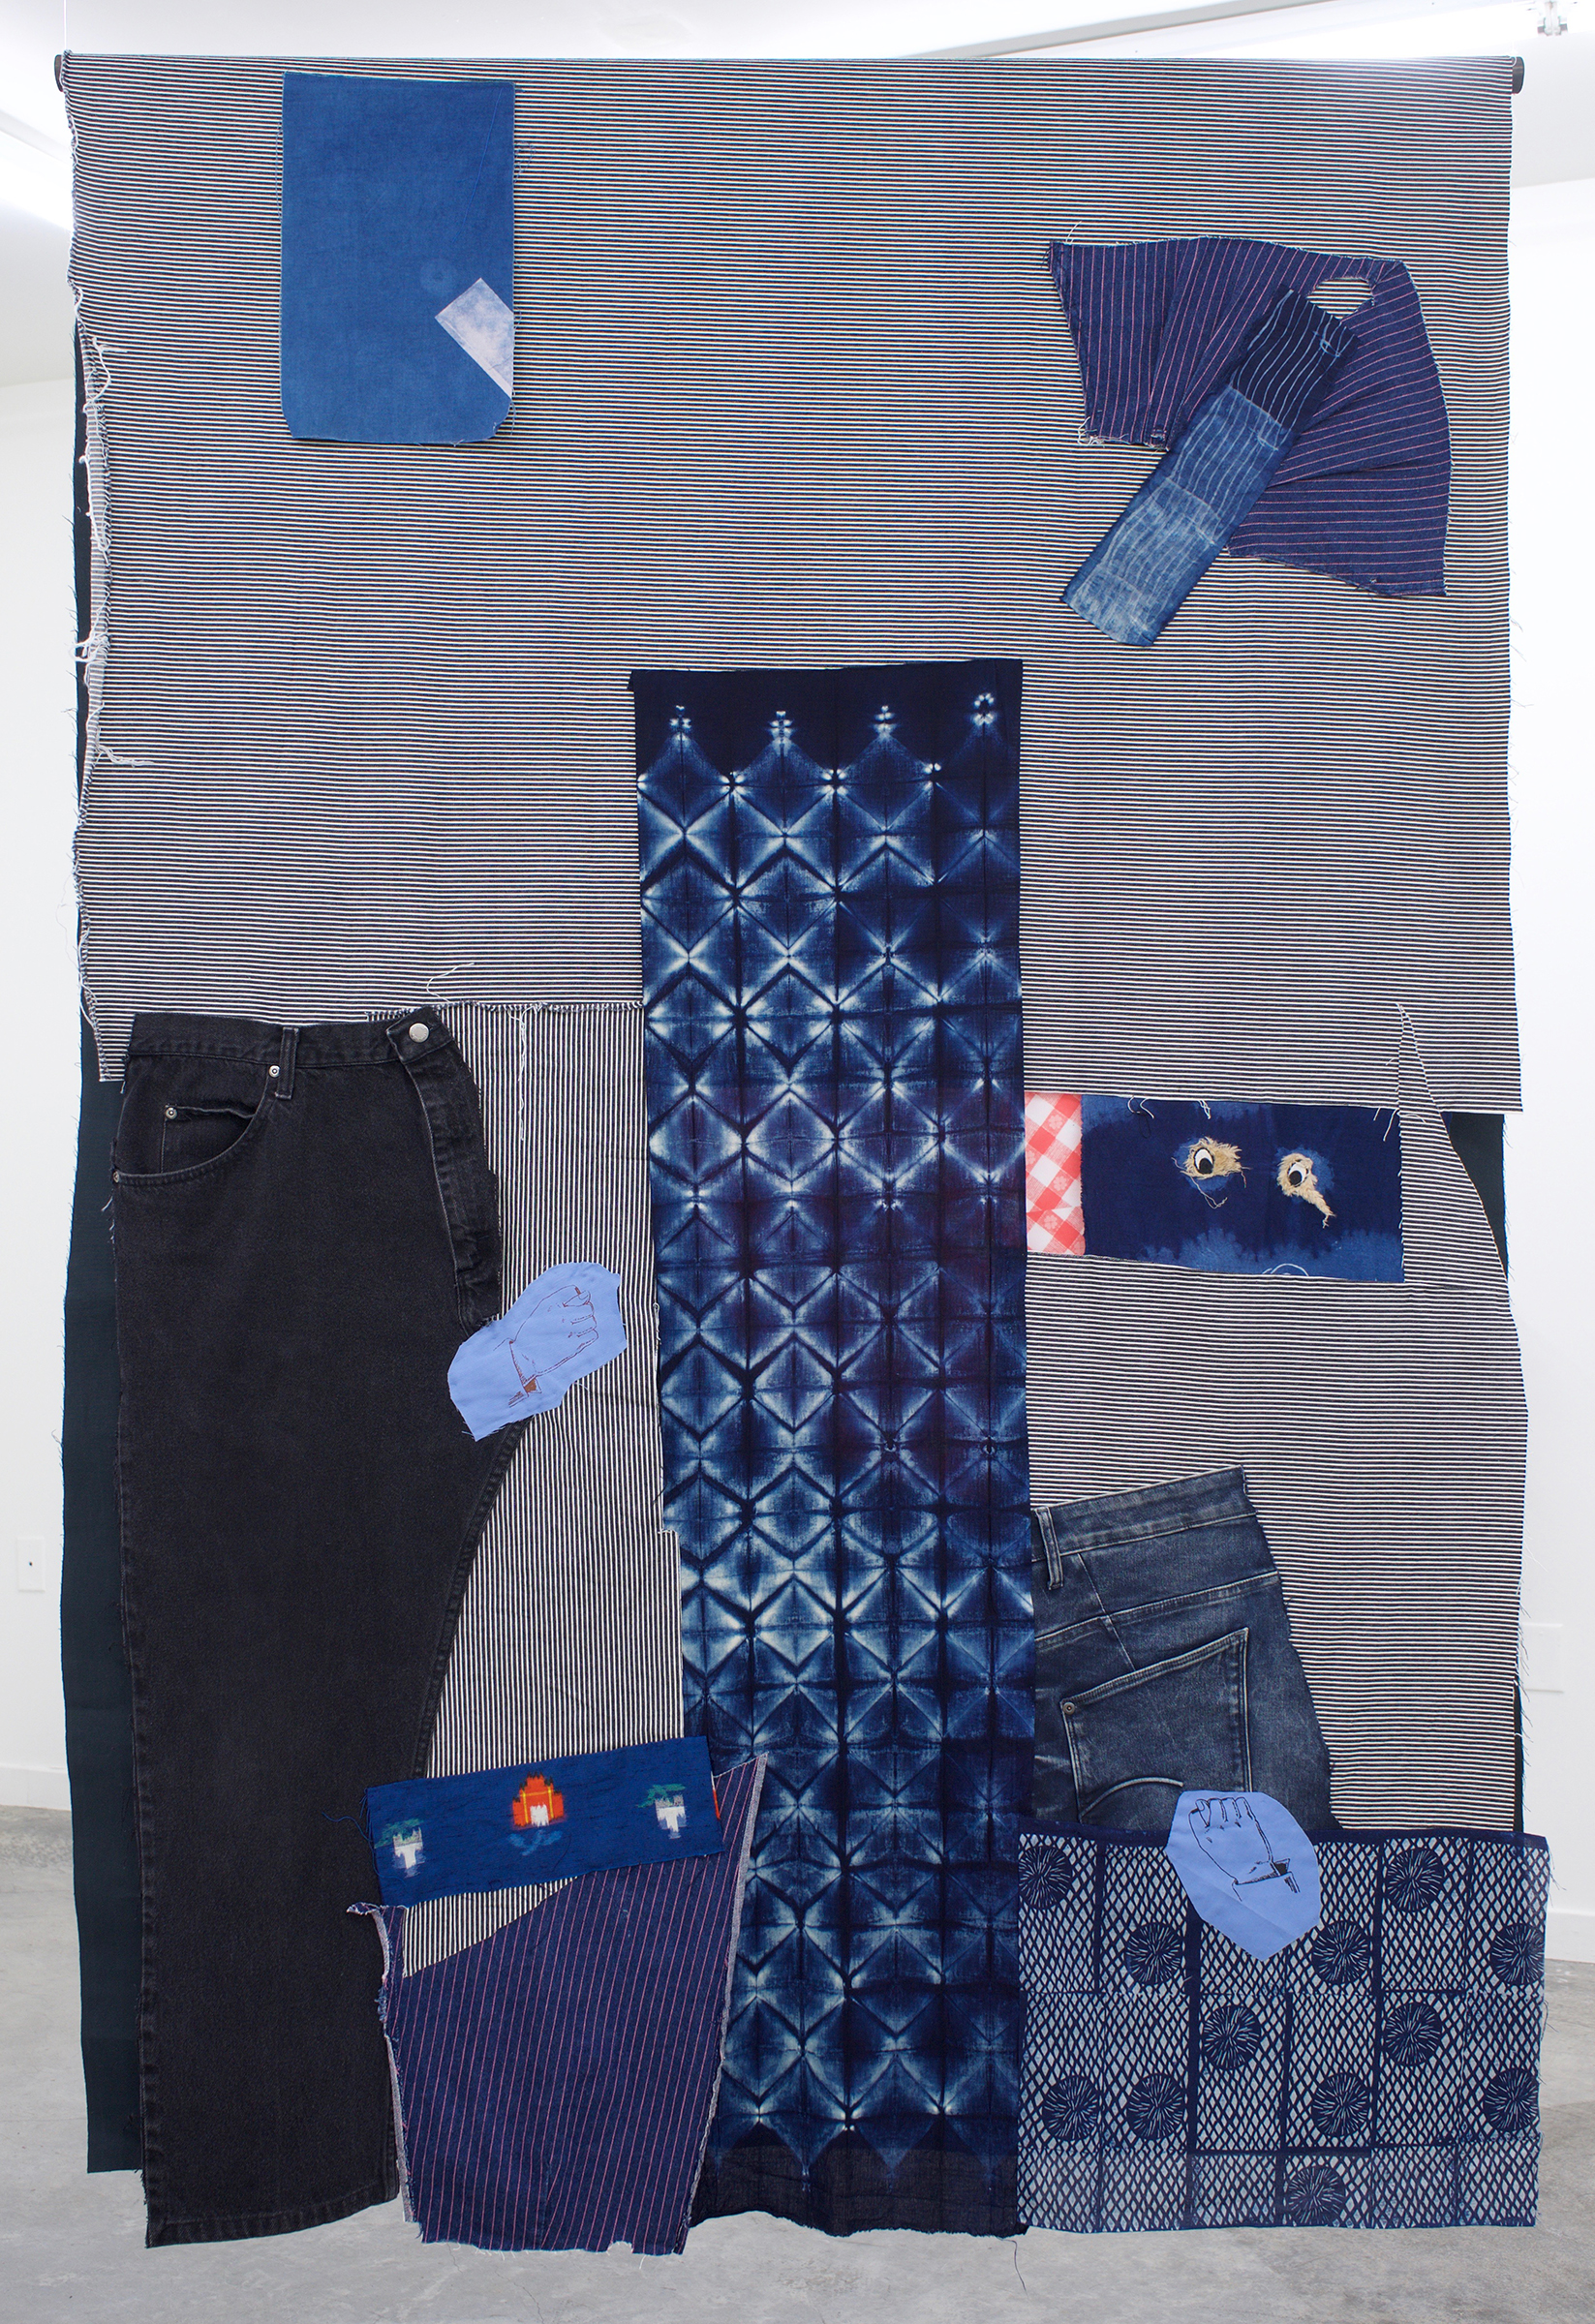  AMANDA CURRERI Homo-Hime, 2018 Hand-dyed and hand-printed fabrics with indigo, madder, soot/soya, acrylic on various fabrics such as used tablecloths, vintage Japanese silk, Japanese denim (new), deconstructed denim jeans, dog toy eyes, digital prin